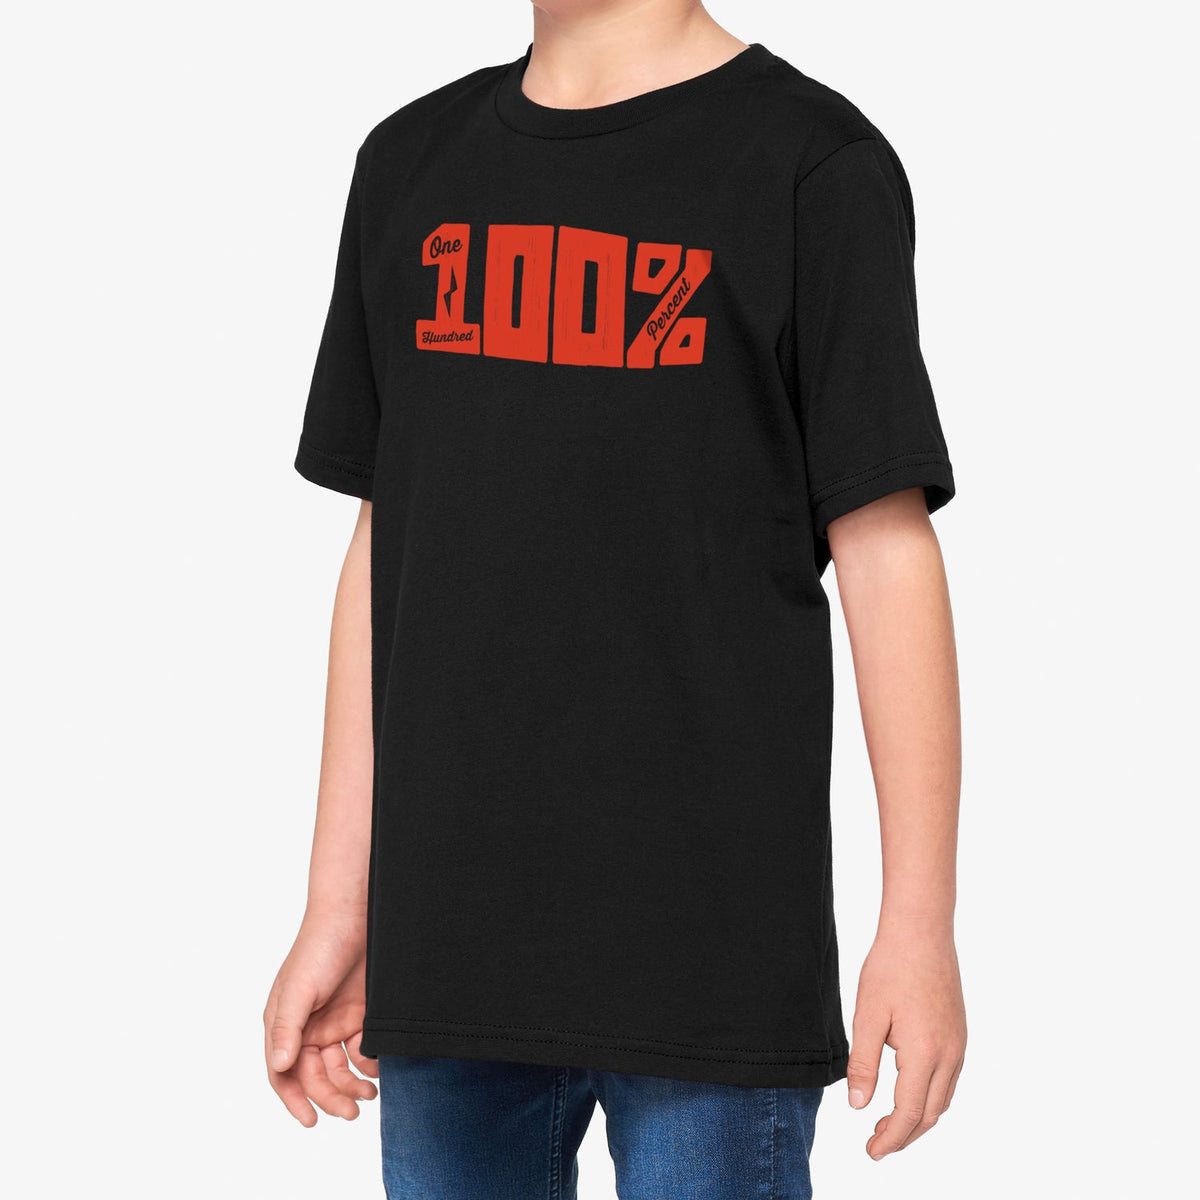 100% Youth T-Shirt